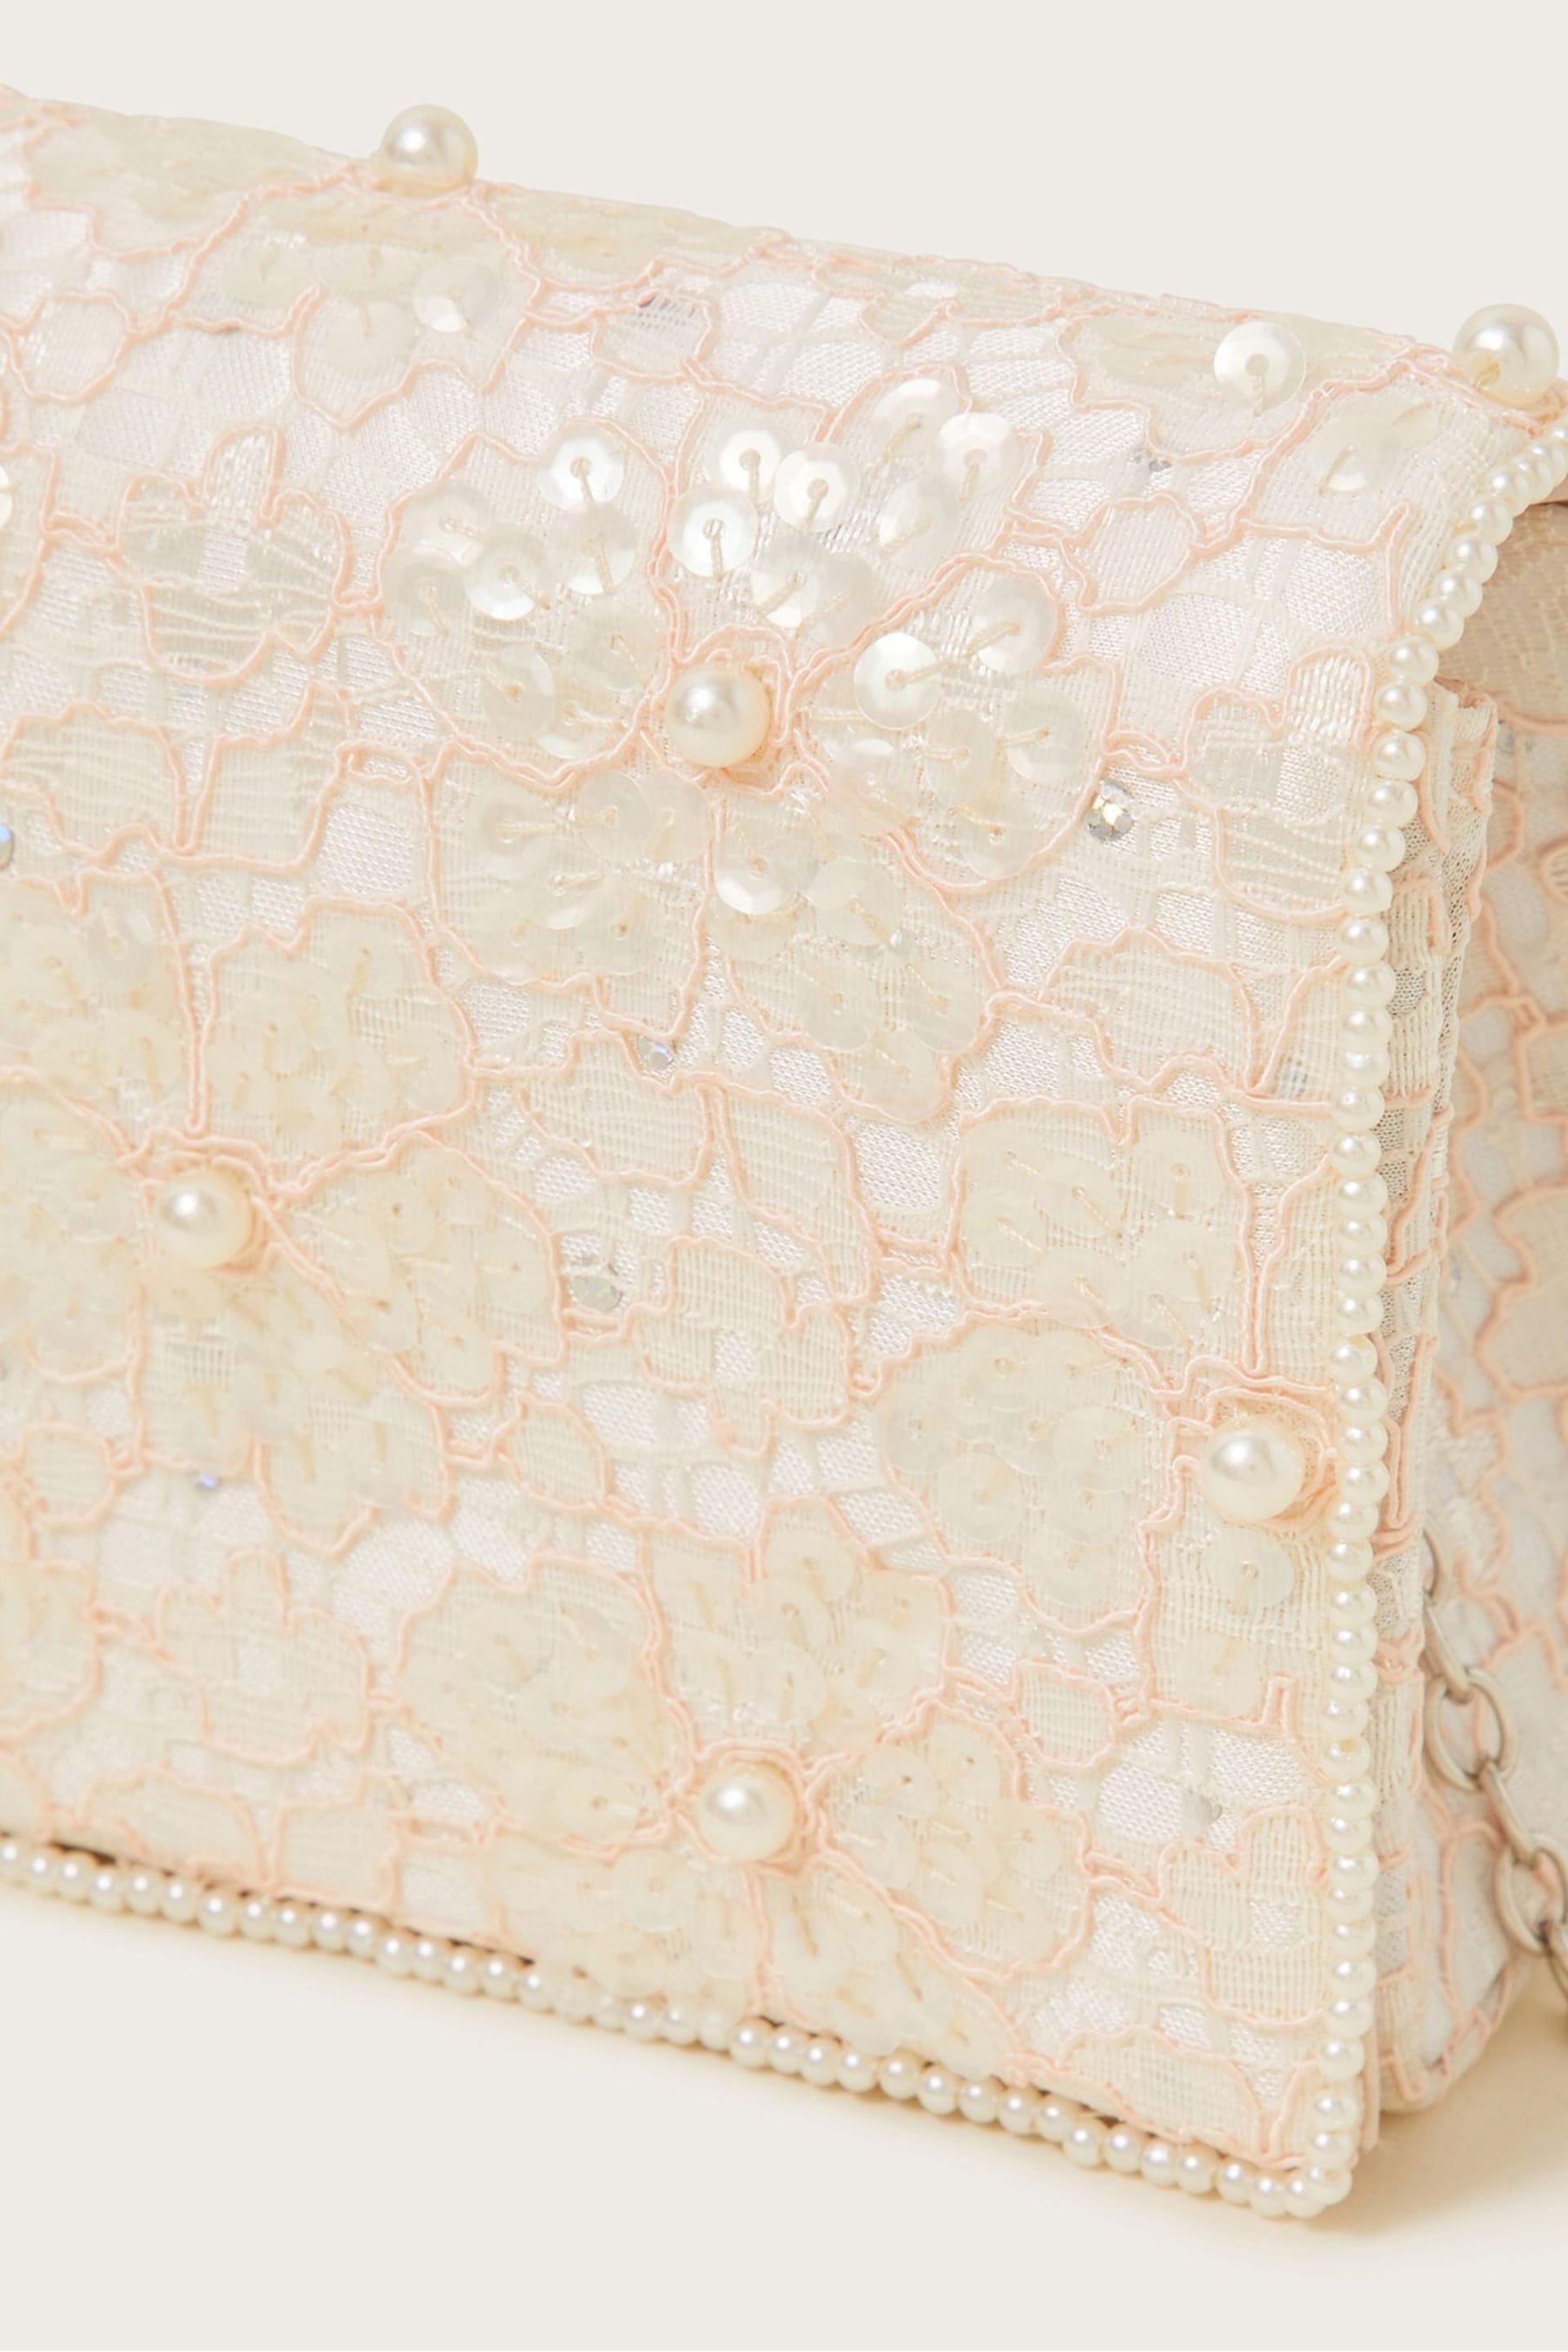 Monsoon Pink Pearly Lace Bag - Image 3 of 3